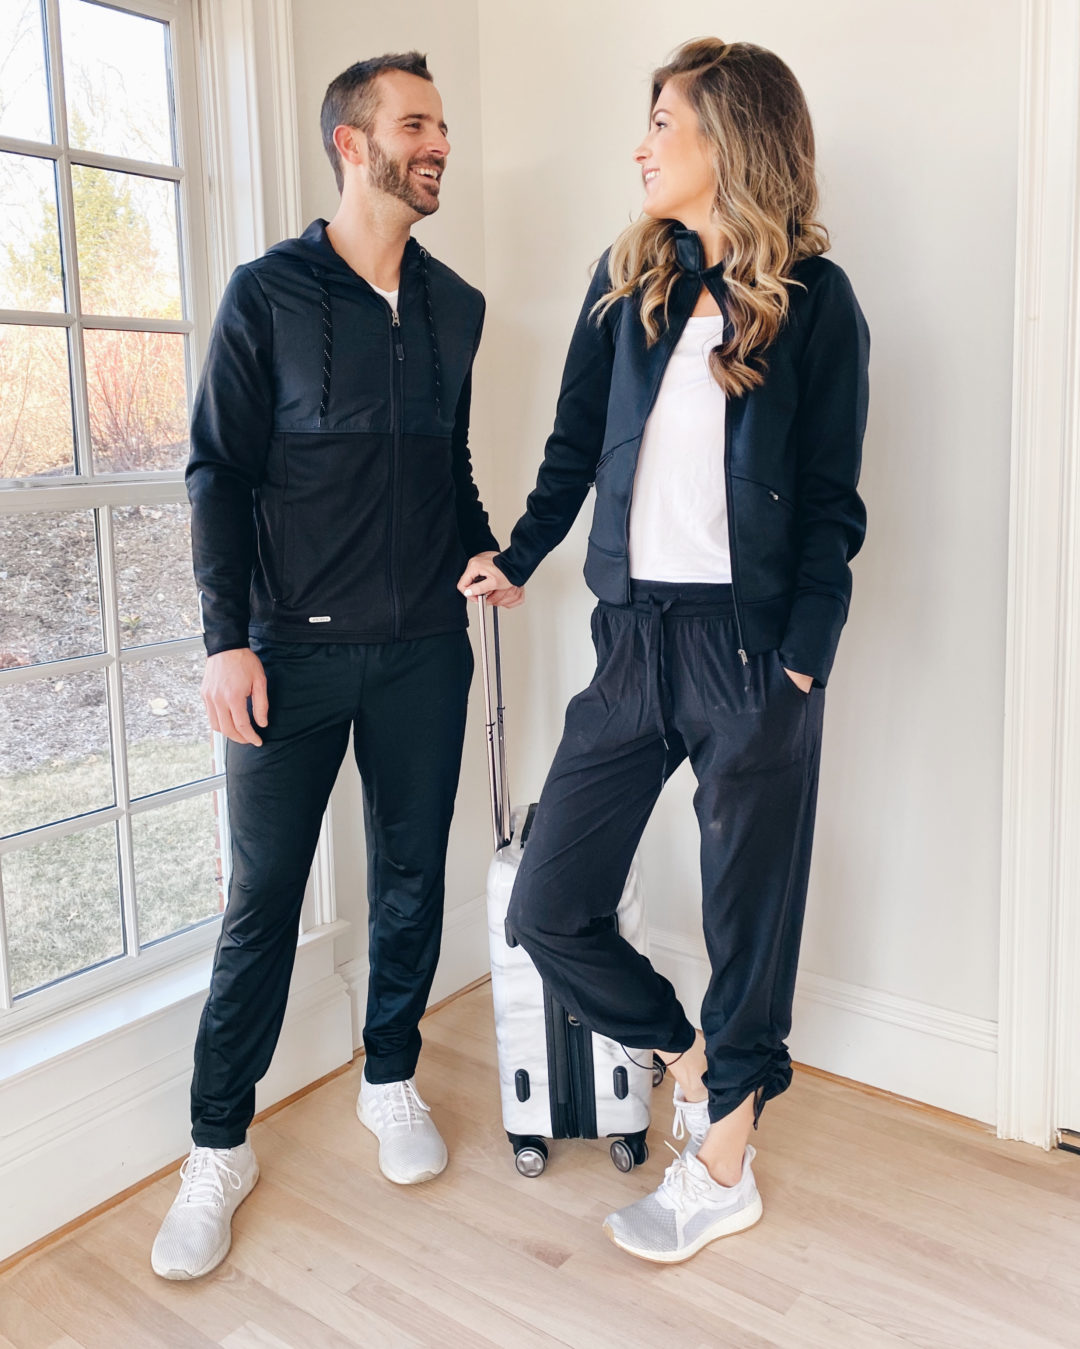 cute and comfy travel outfits for him and her